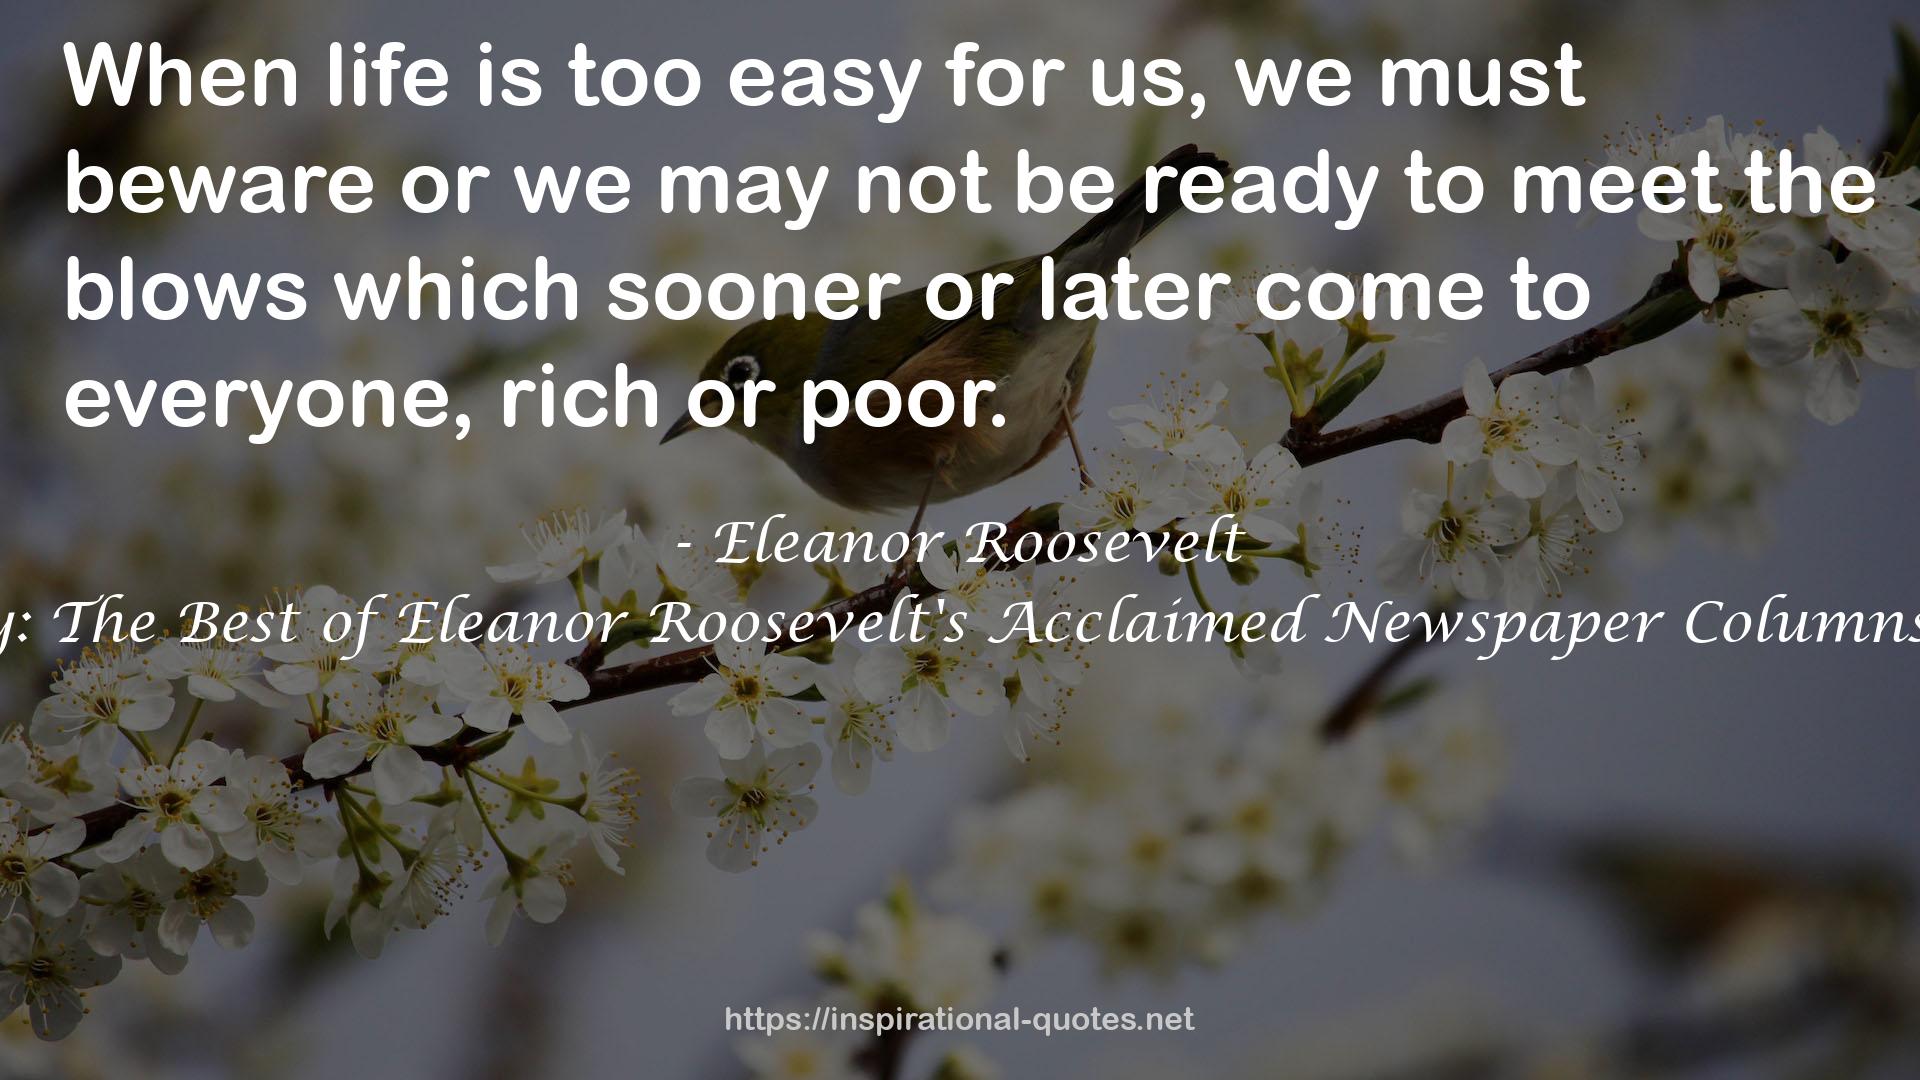 My Day: The Best of Eleanor Roosevelt's Acclaimed Newspaper Columns 1936-62 QUOTES